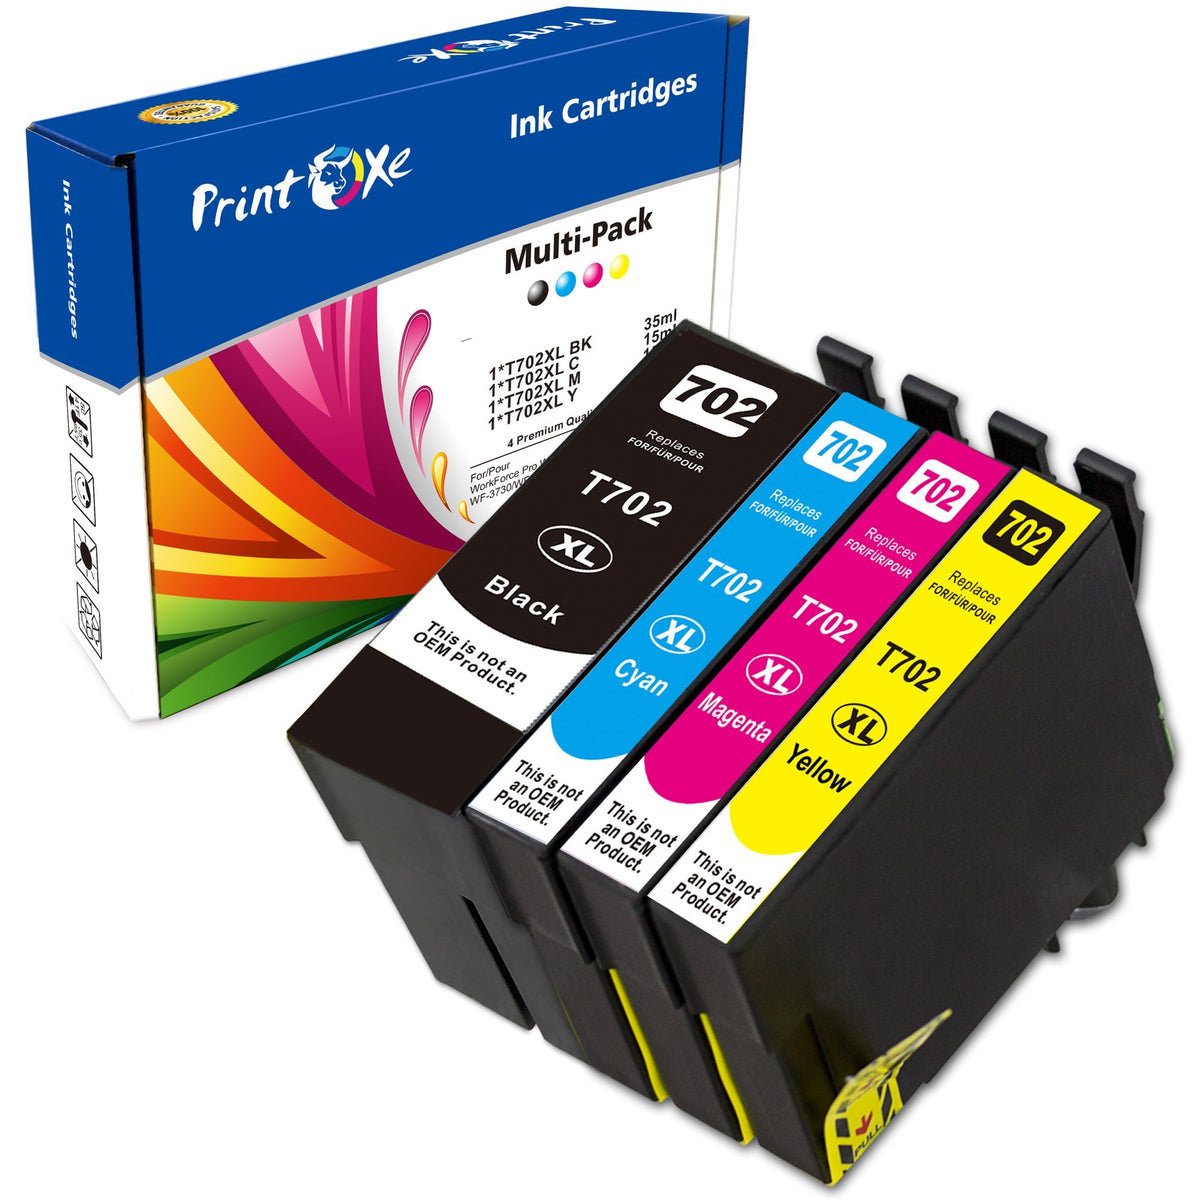 T702 XL Remanufactured Set | 4 Ink Cartridges | High Yield of EPSON T702 High Yield | Black, Cyan, Magenta, Yellow | 702 for Epson Workforce Pro WF-3720 WF-3730 WF-3733 PRINTOXE Ink Cartridge